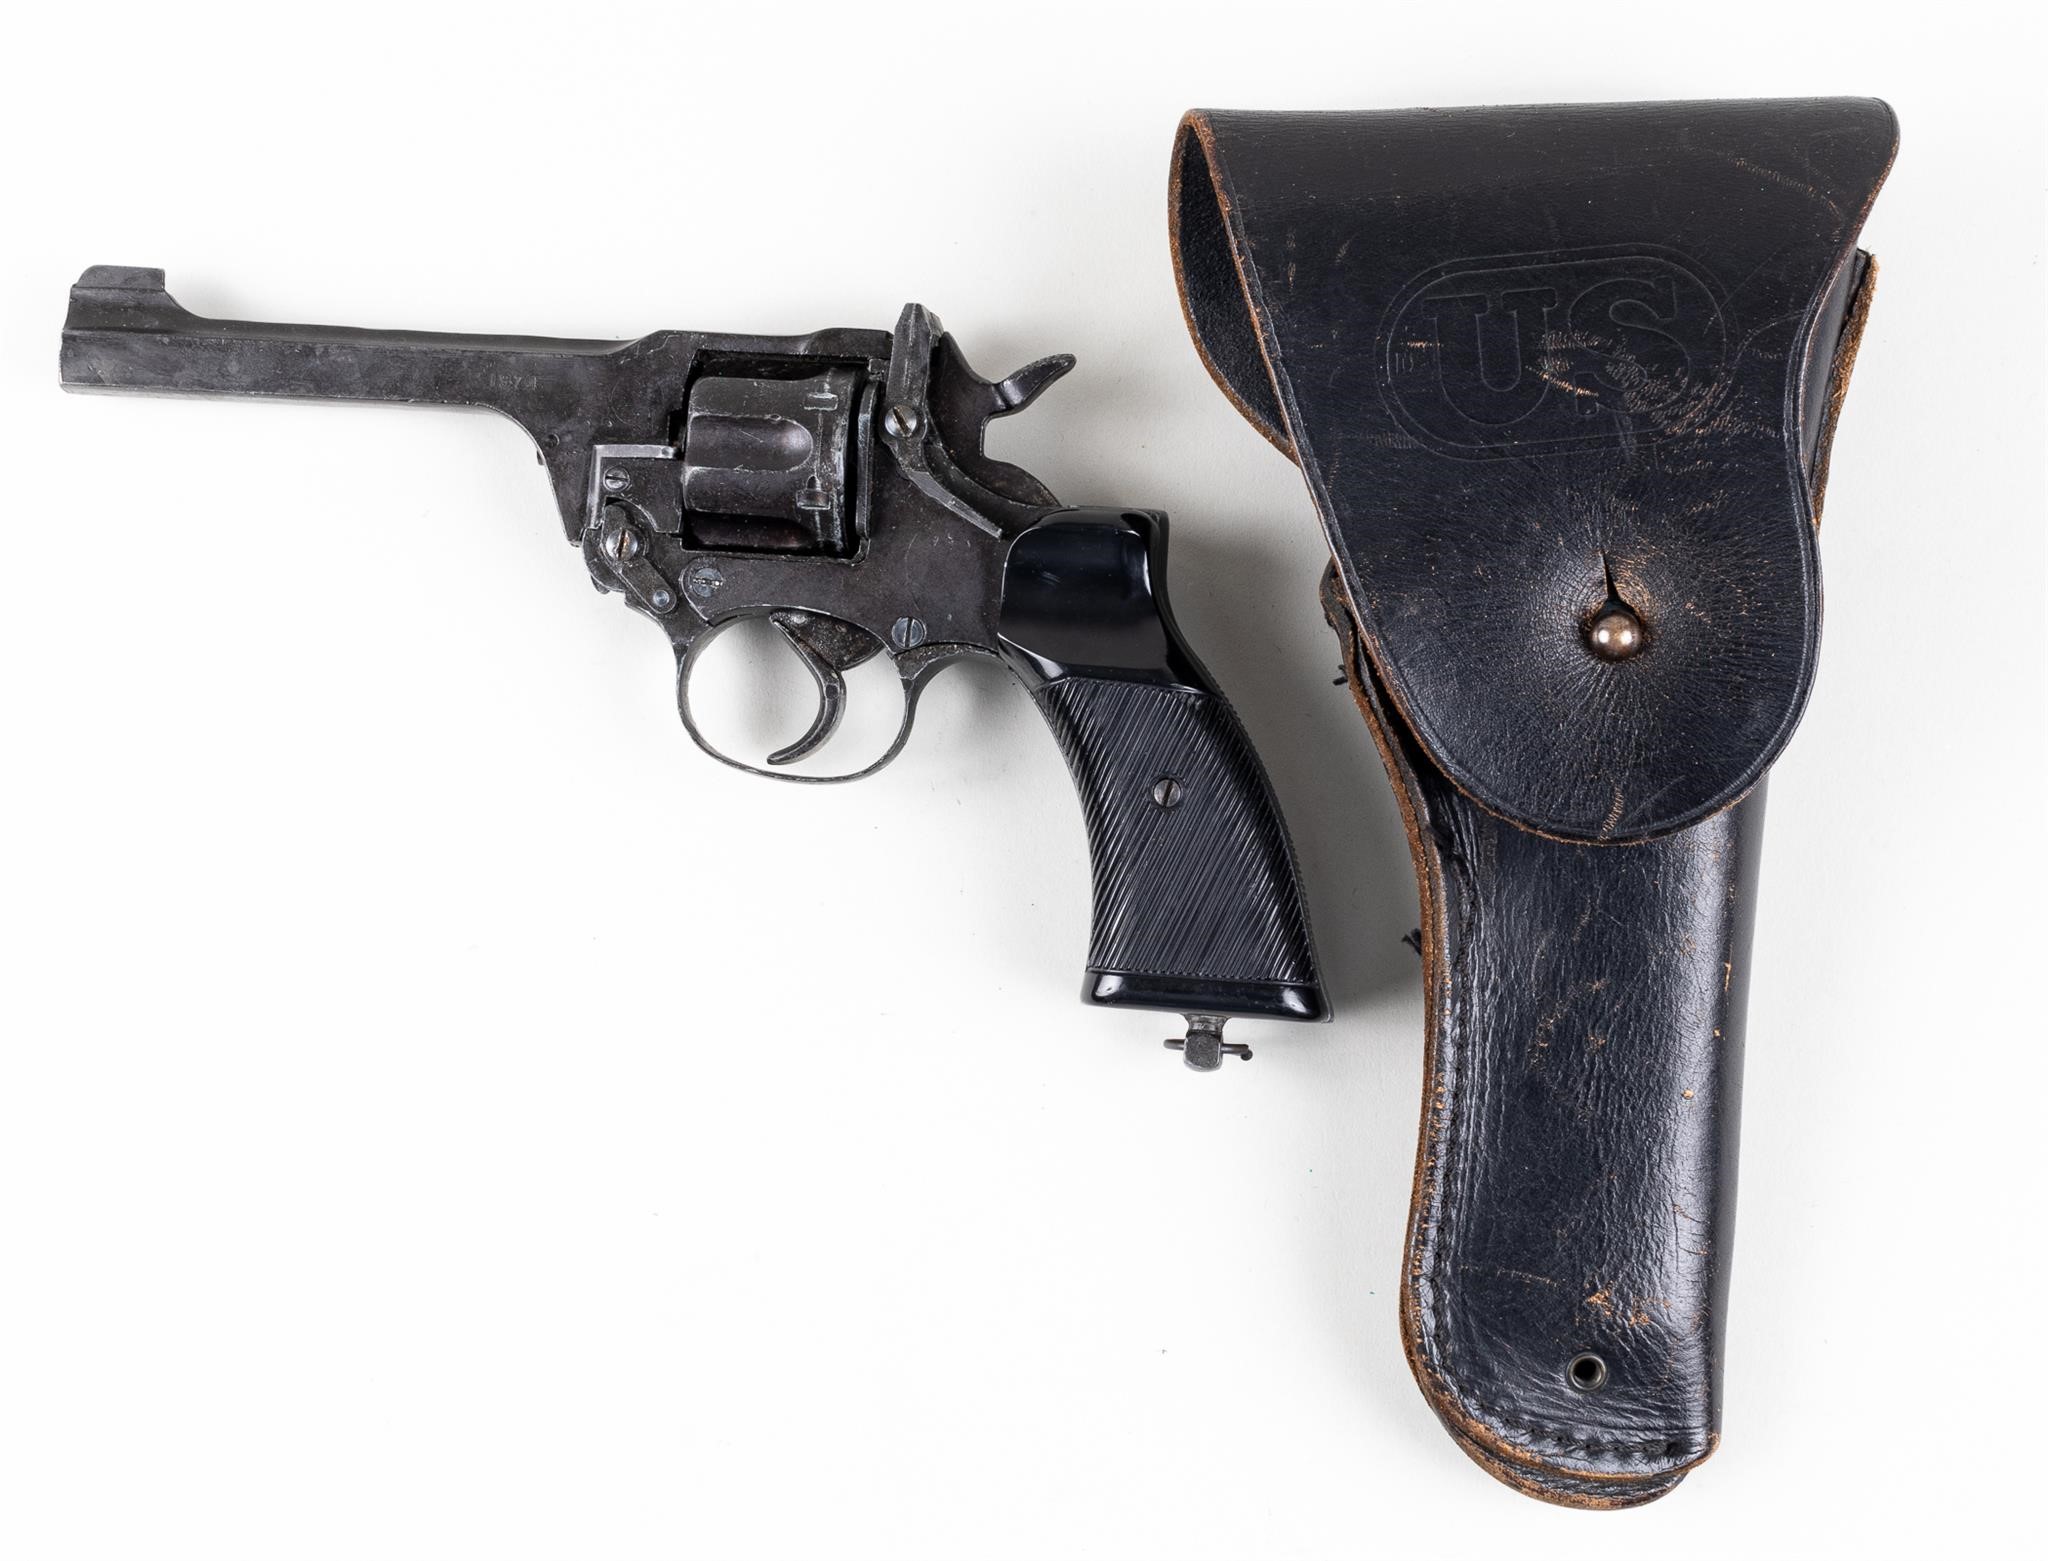 ENFIELD NO 2 REPLICA REVOLVER AND HOLSTER